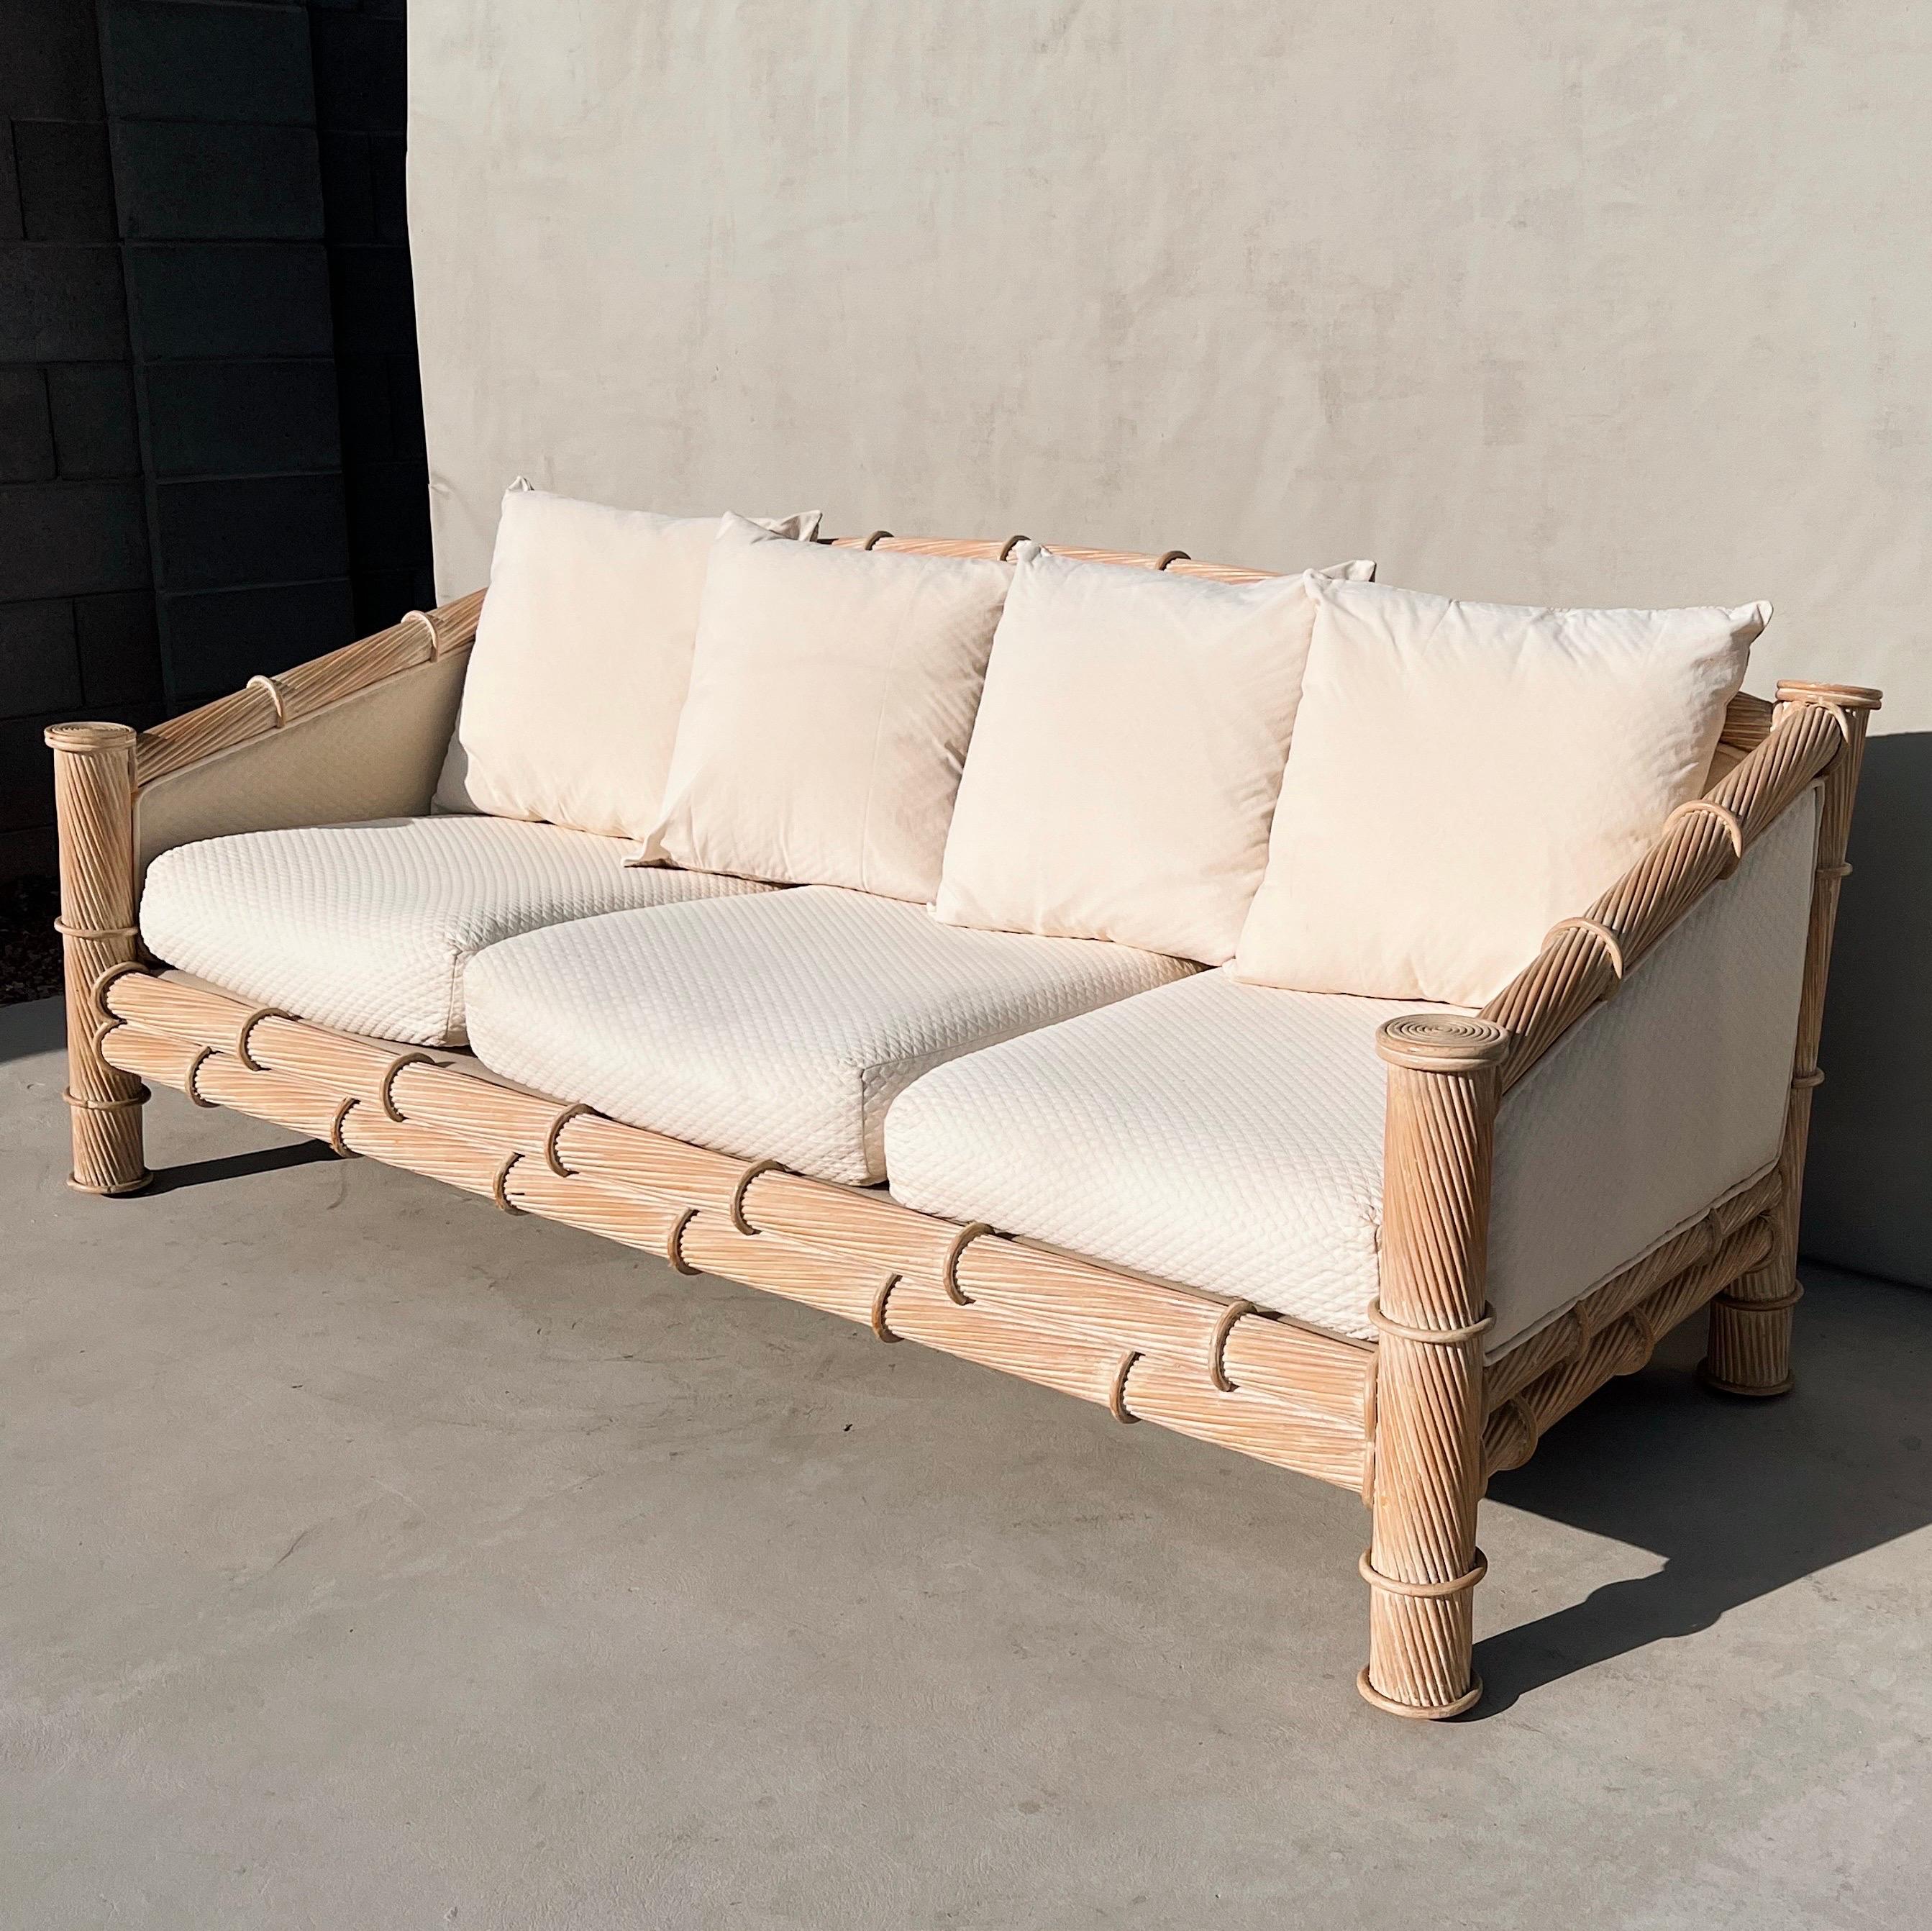 Vintage White Pencil Reed Sofa Attributed to Gabriella Crespi 1